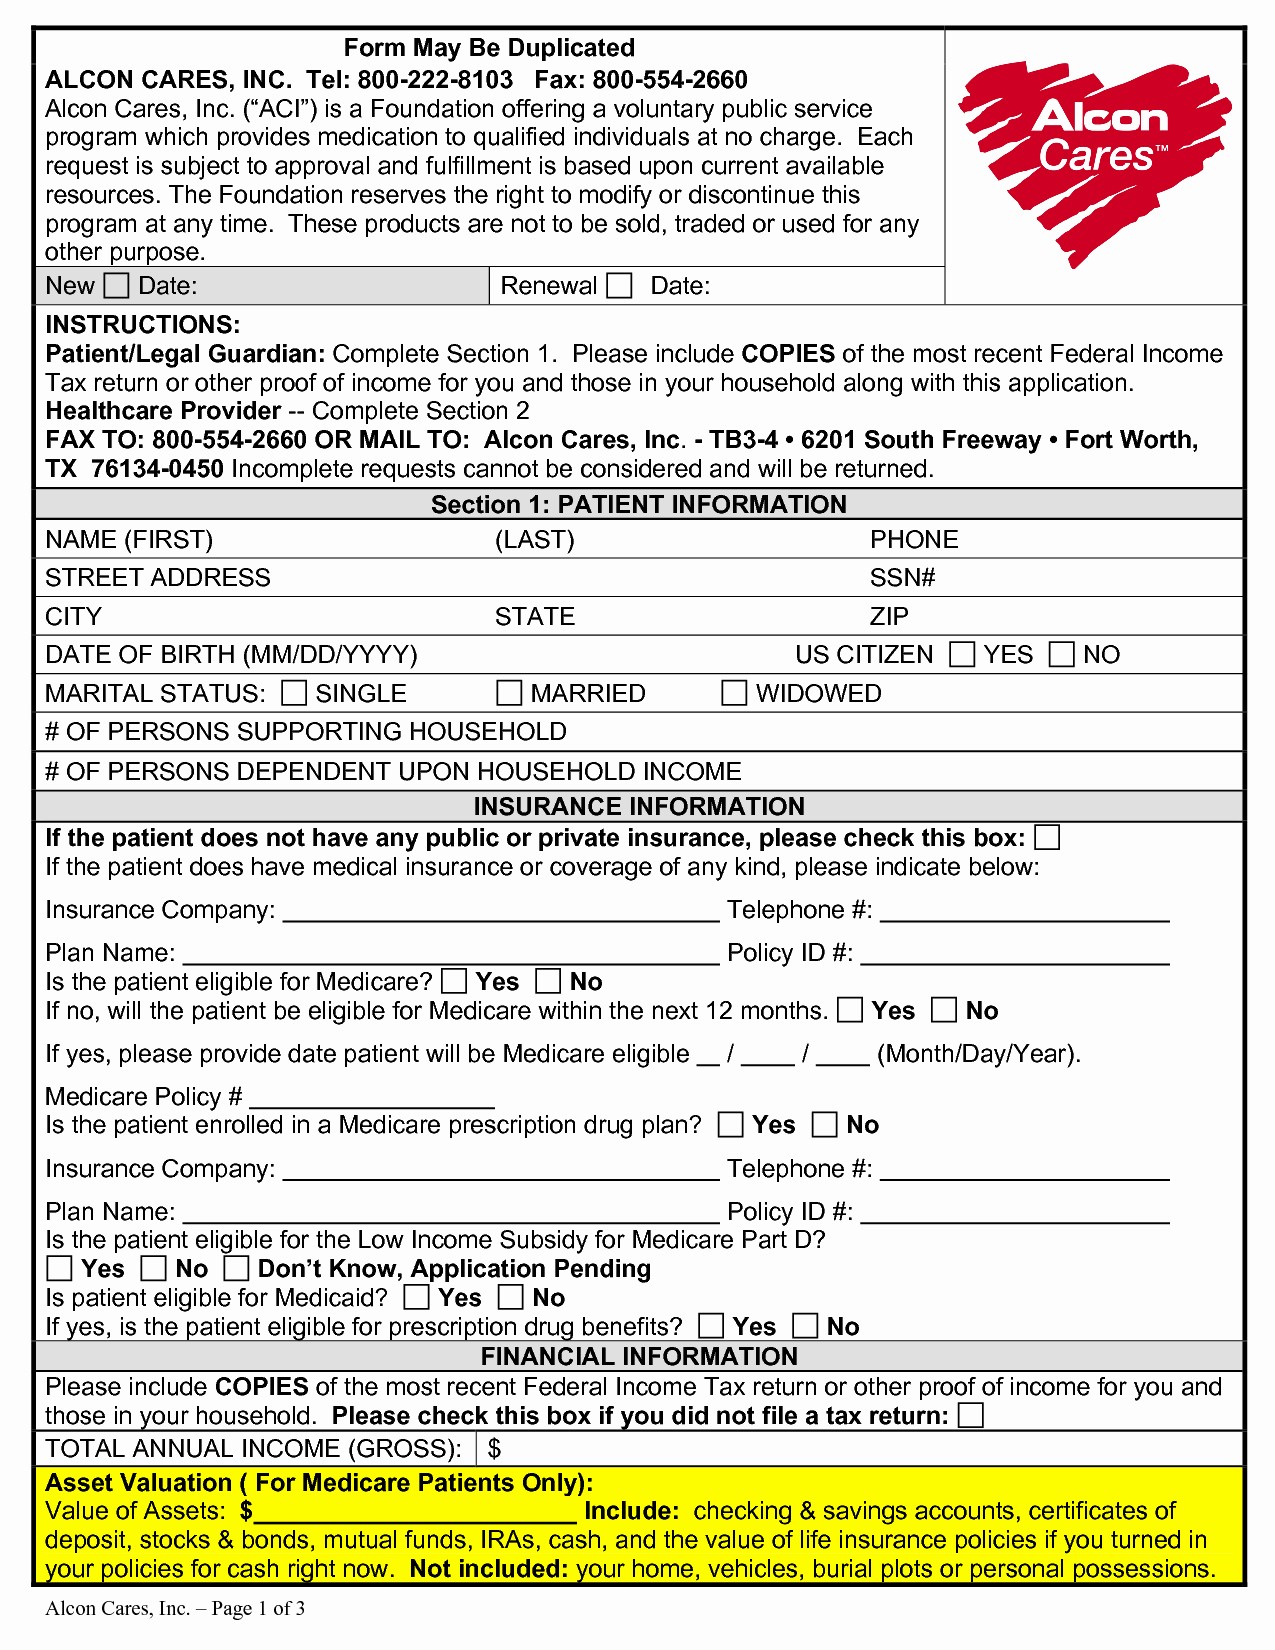 Florida Health Care Power Of Attorney Forms Lovely Form Document